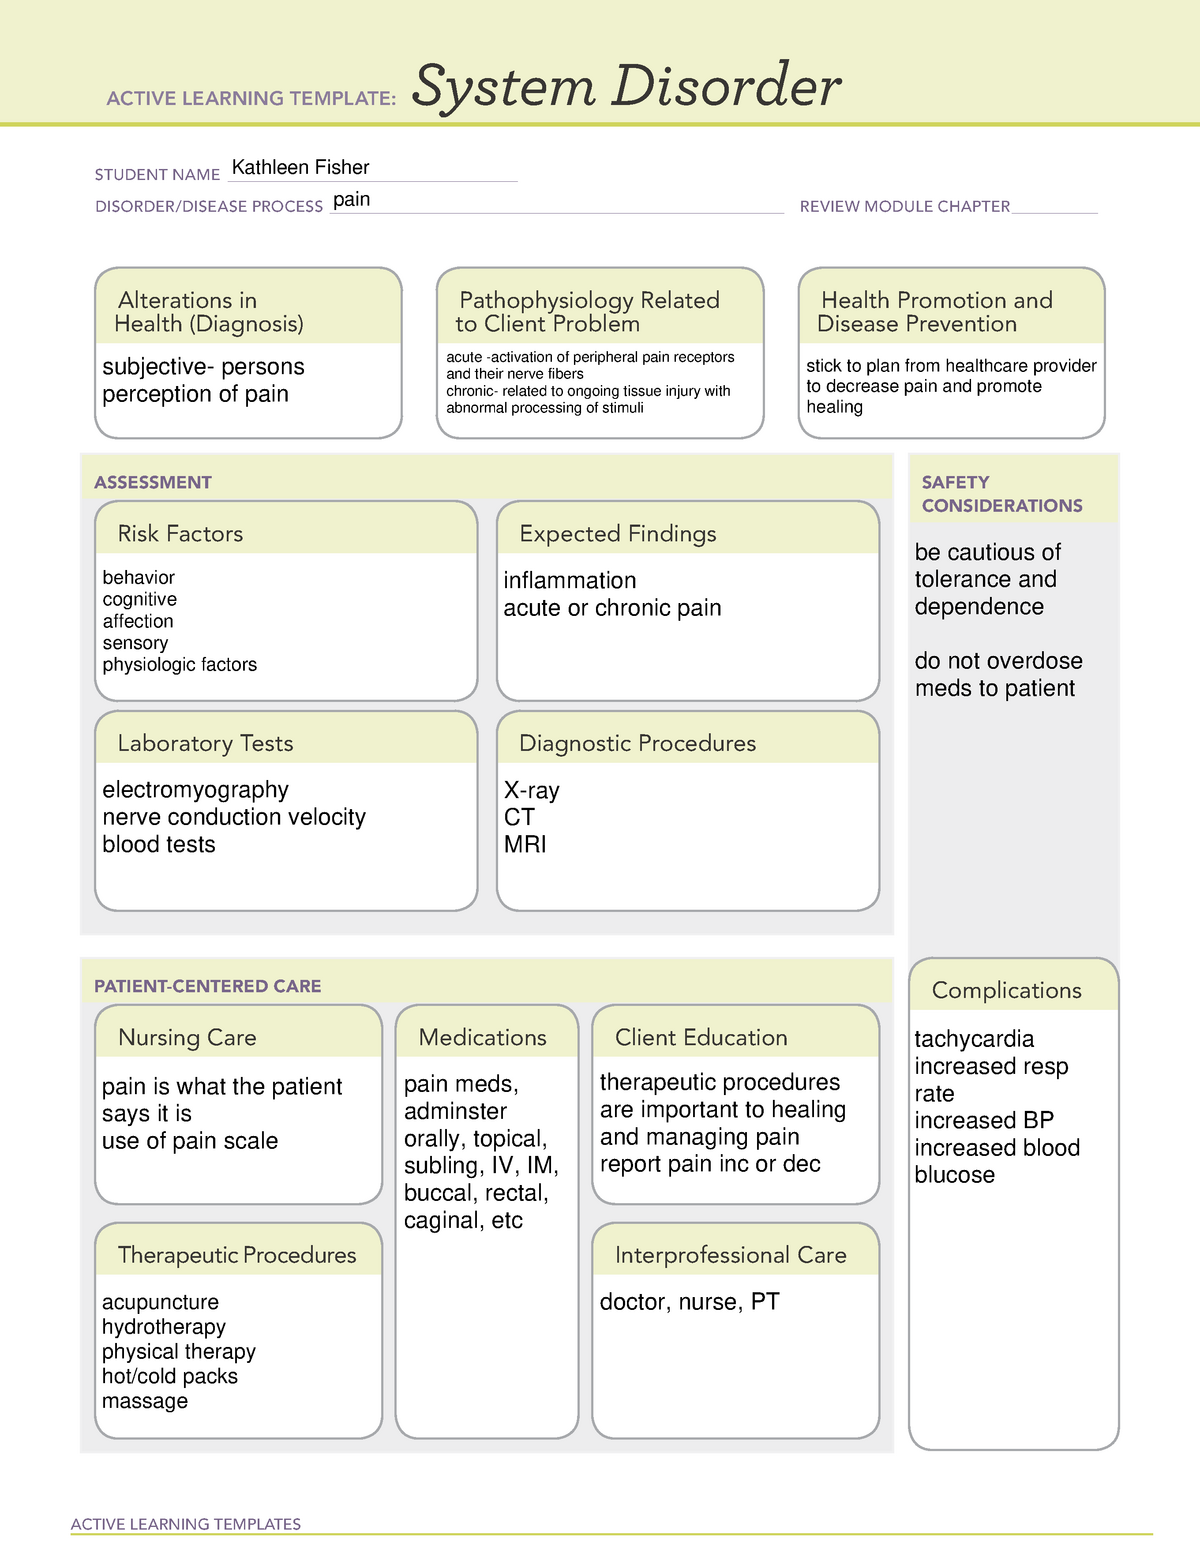 Systemdisorder pain ATI medication/system template ACTIVE LEARNING